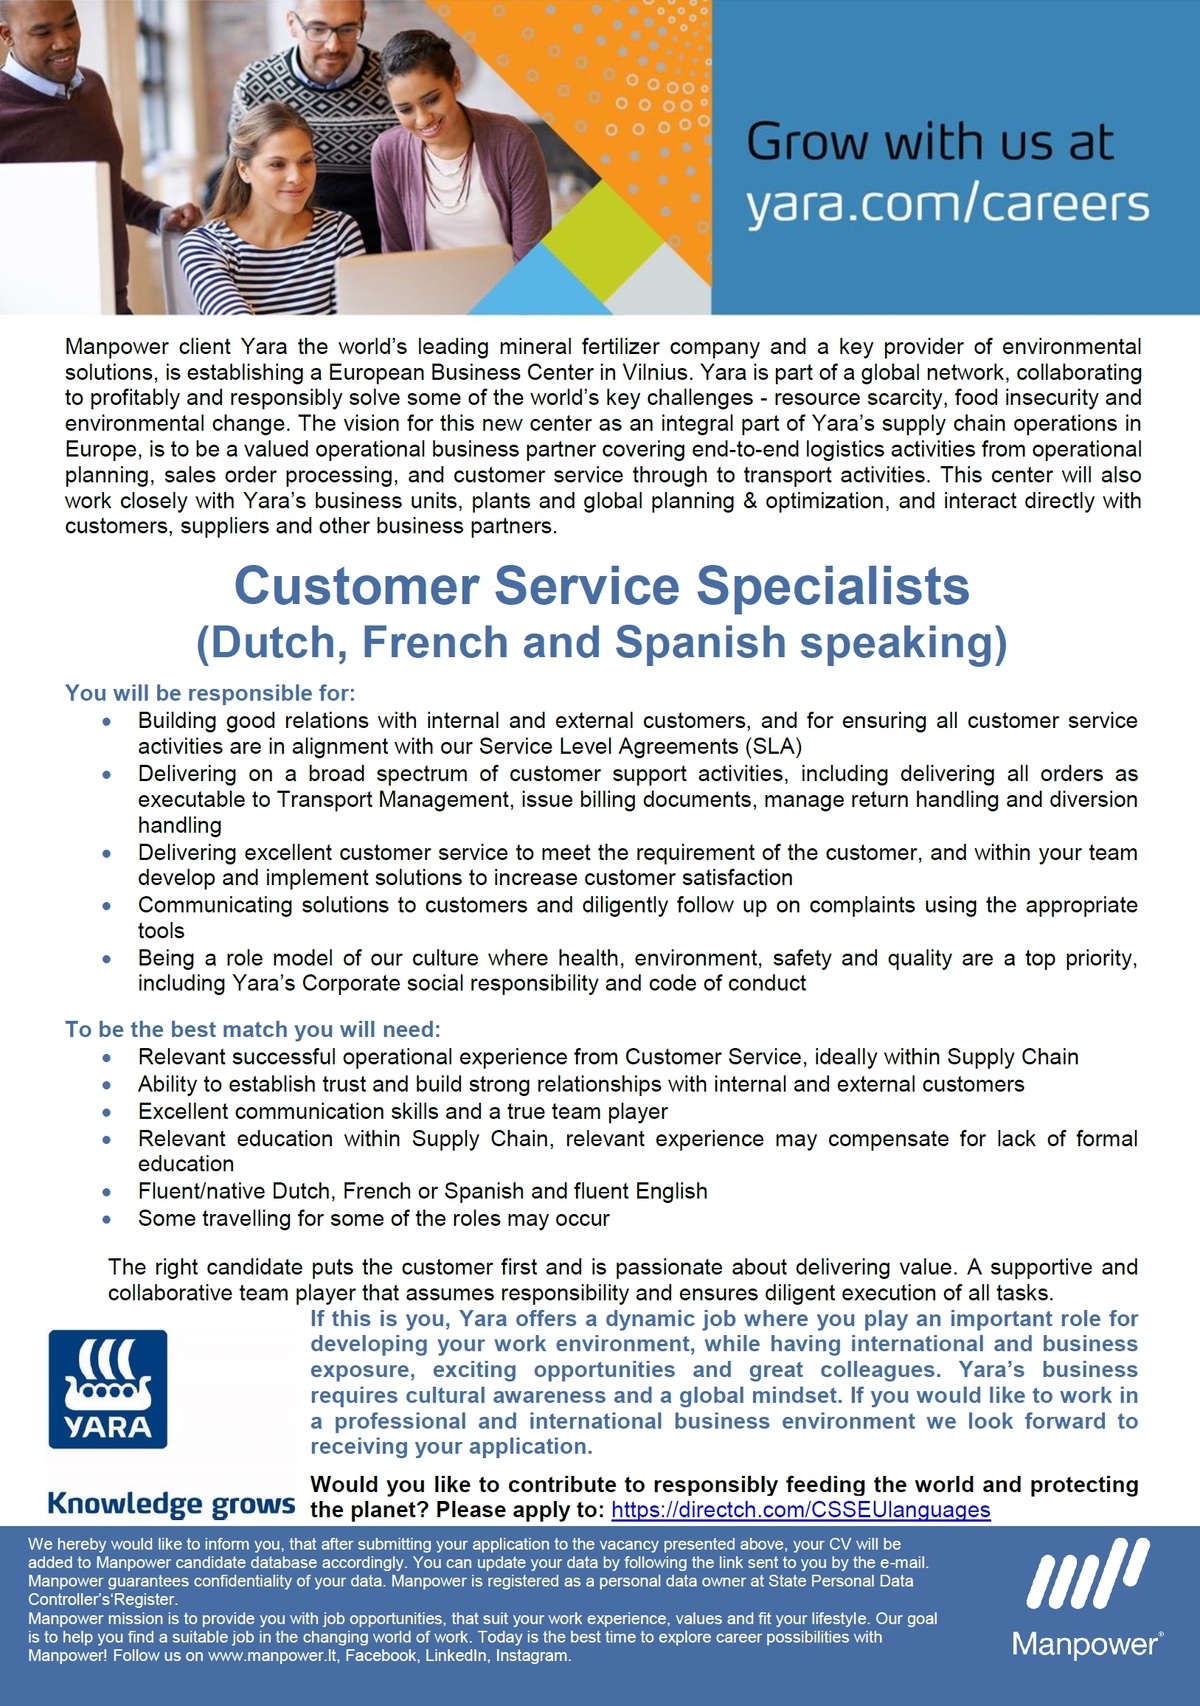 Manpower OÜ Customer Service Specialists (Dutch, French and Spanish speaking)